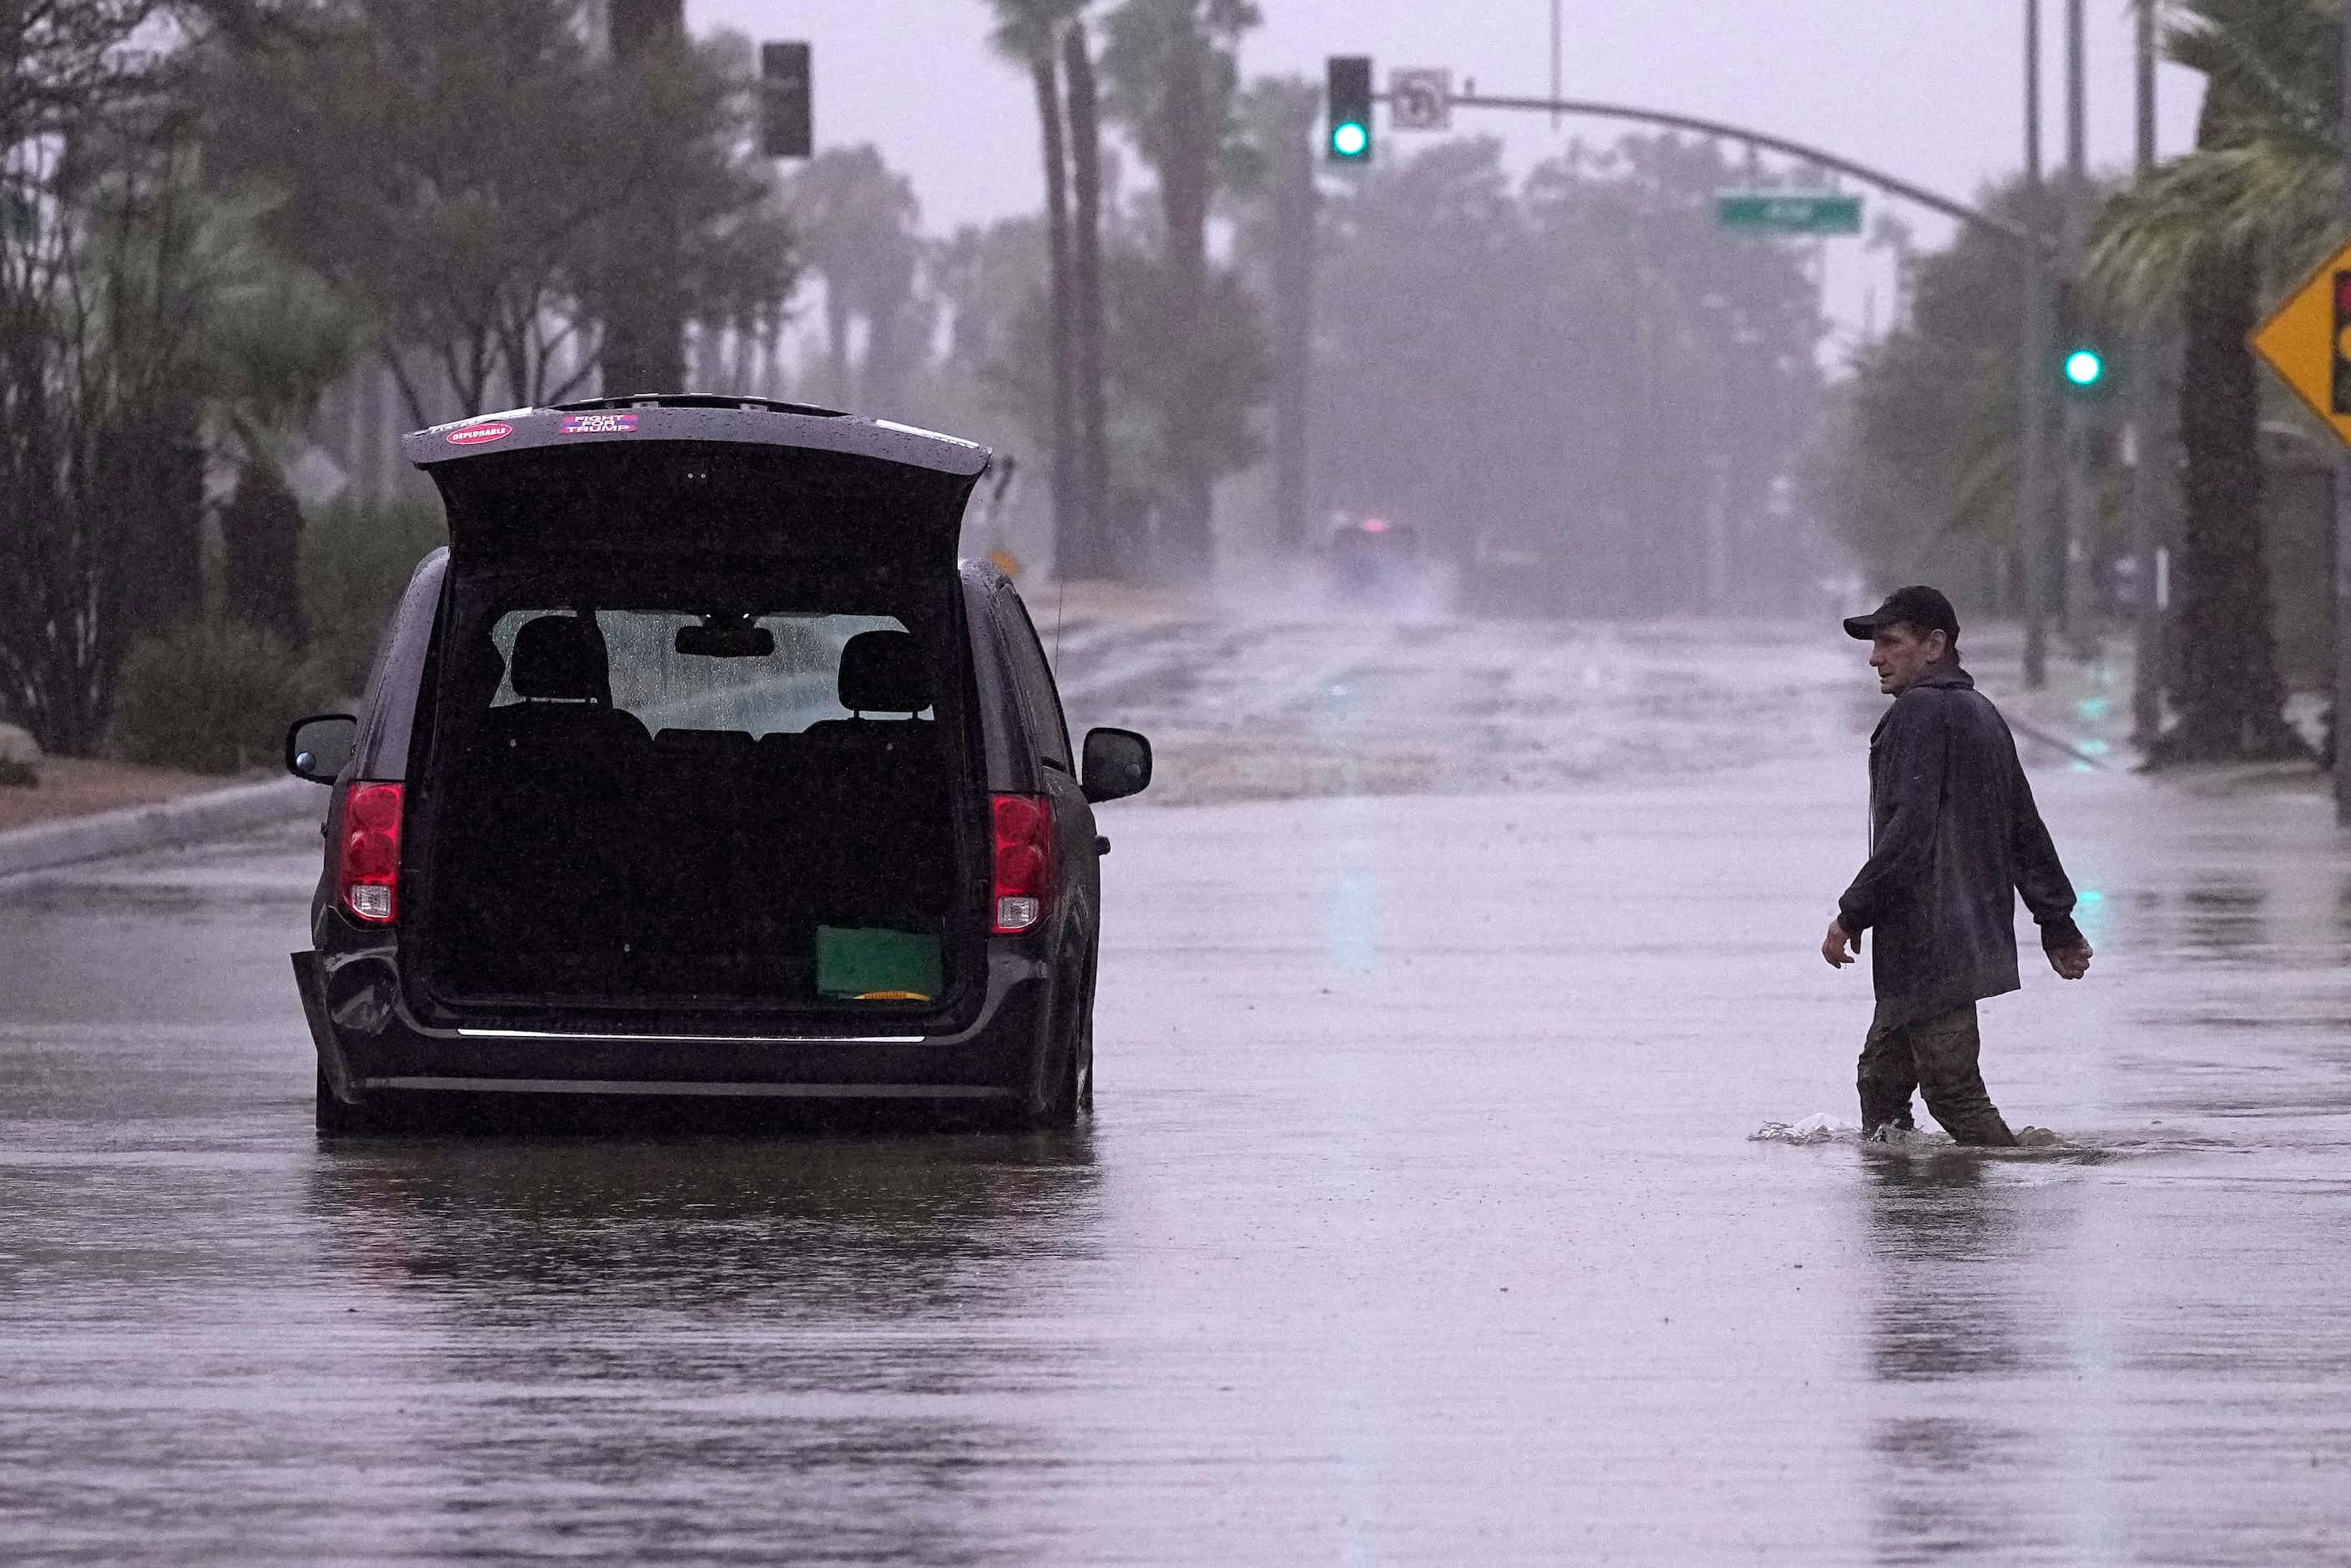 A motorist walks out to remove belongings from his vehicle after becoming stuck in a flooded...